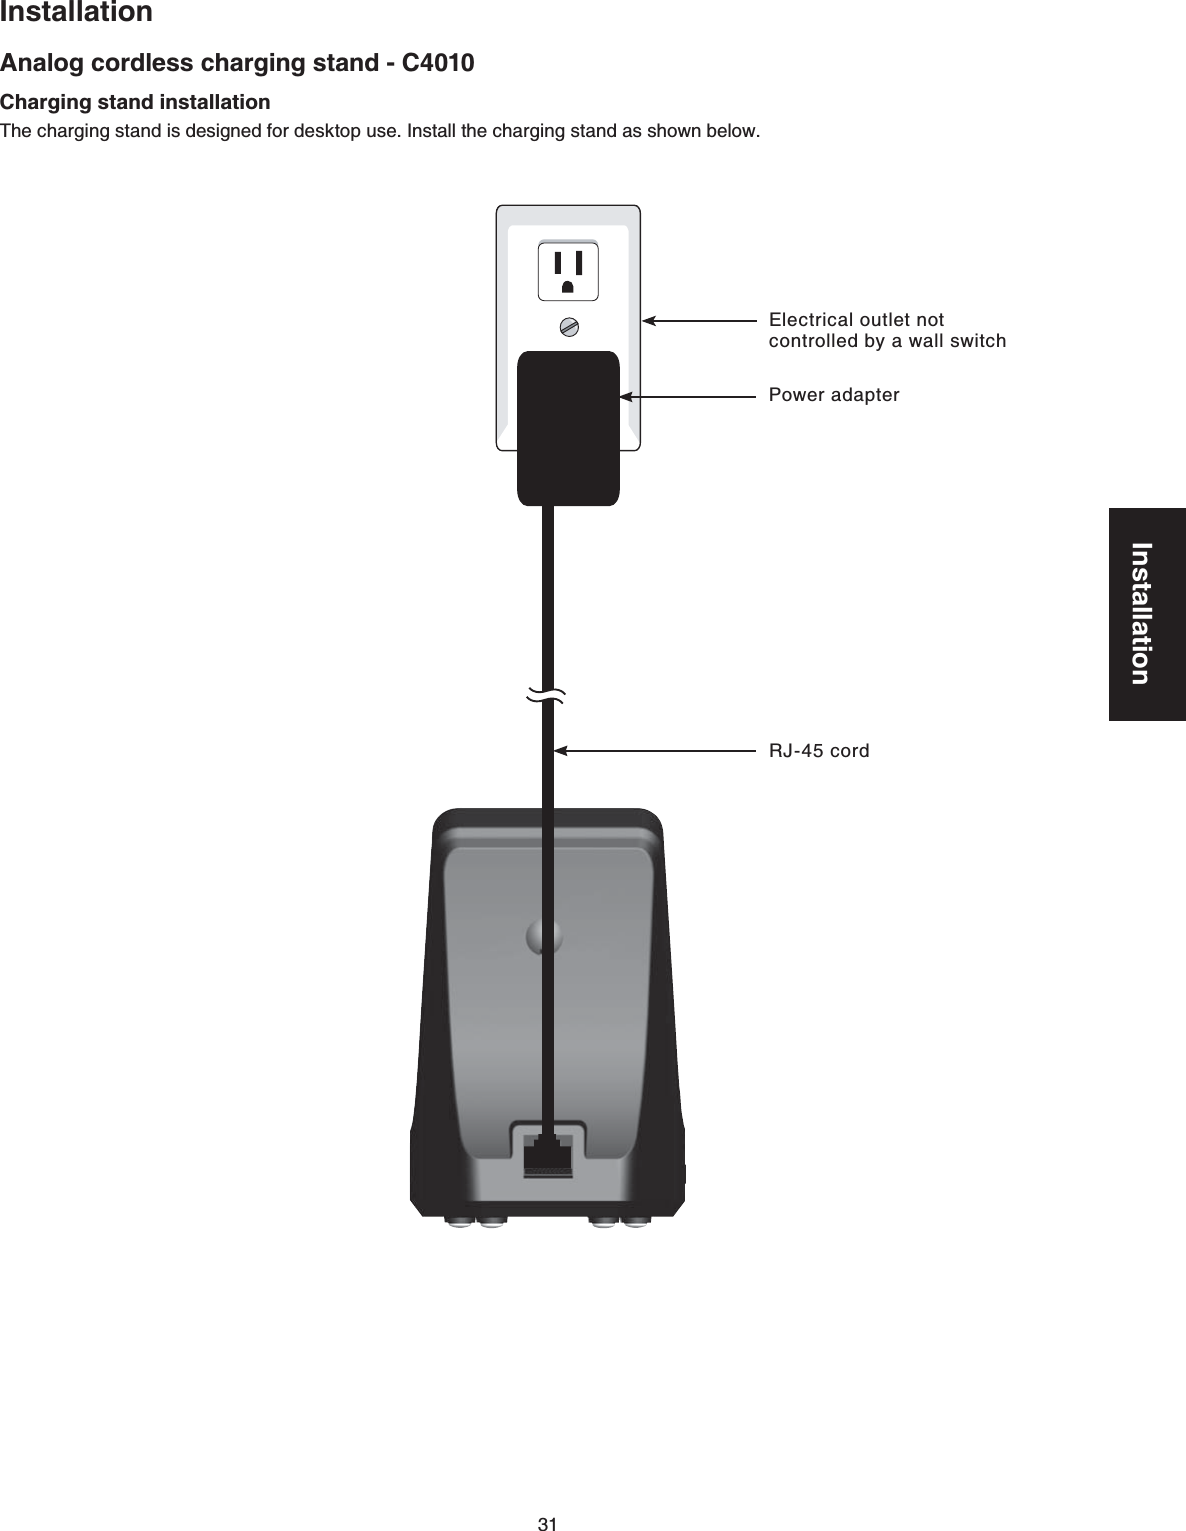 31InstallationAnalog cordless charging stand - C4010InstallationCharging stand installationThe charging stand is designed for desktop use. Install the charging stand as shown below.Power adapterElectrical outlet not controlled by a wall switchRJ-45 cord